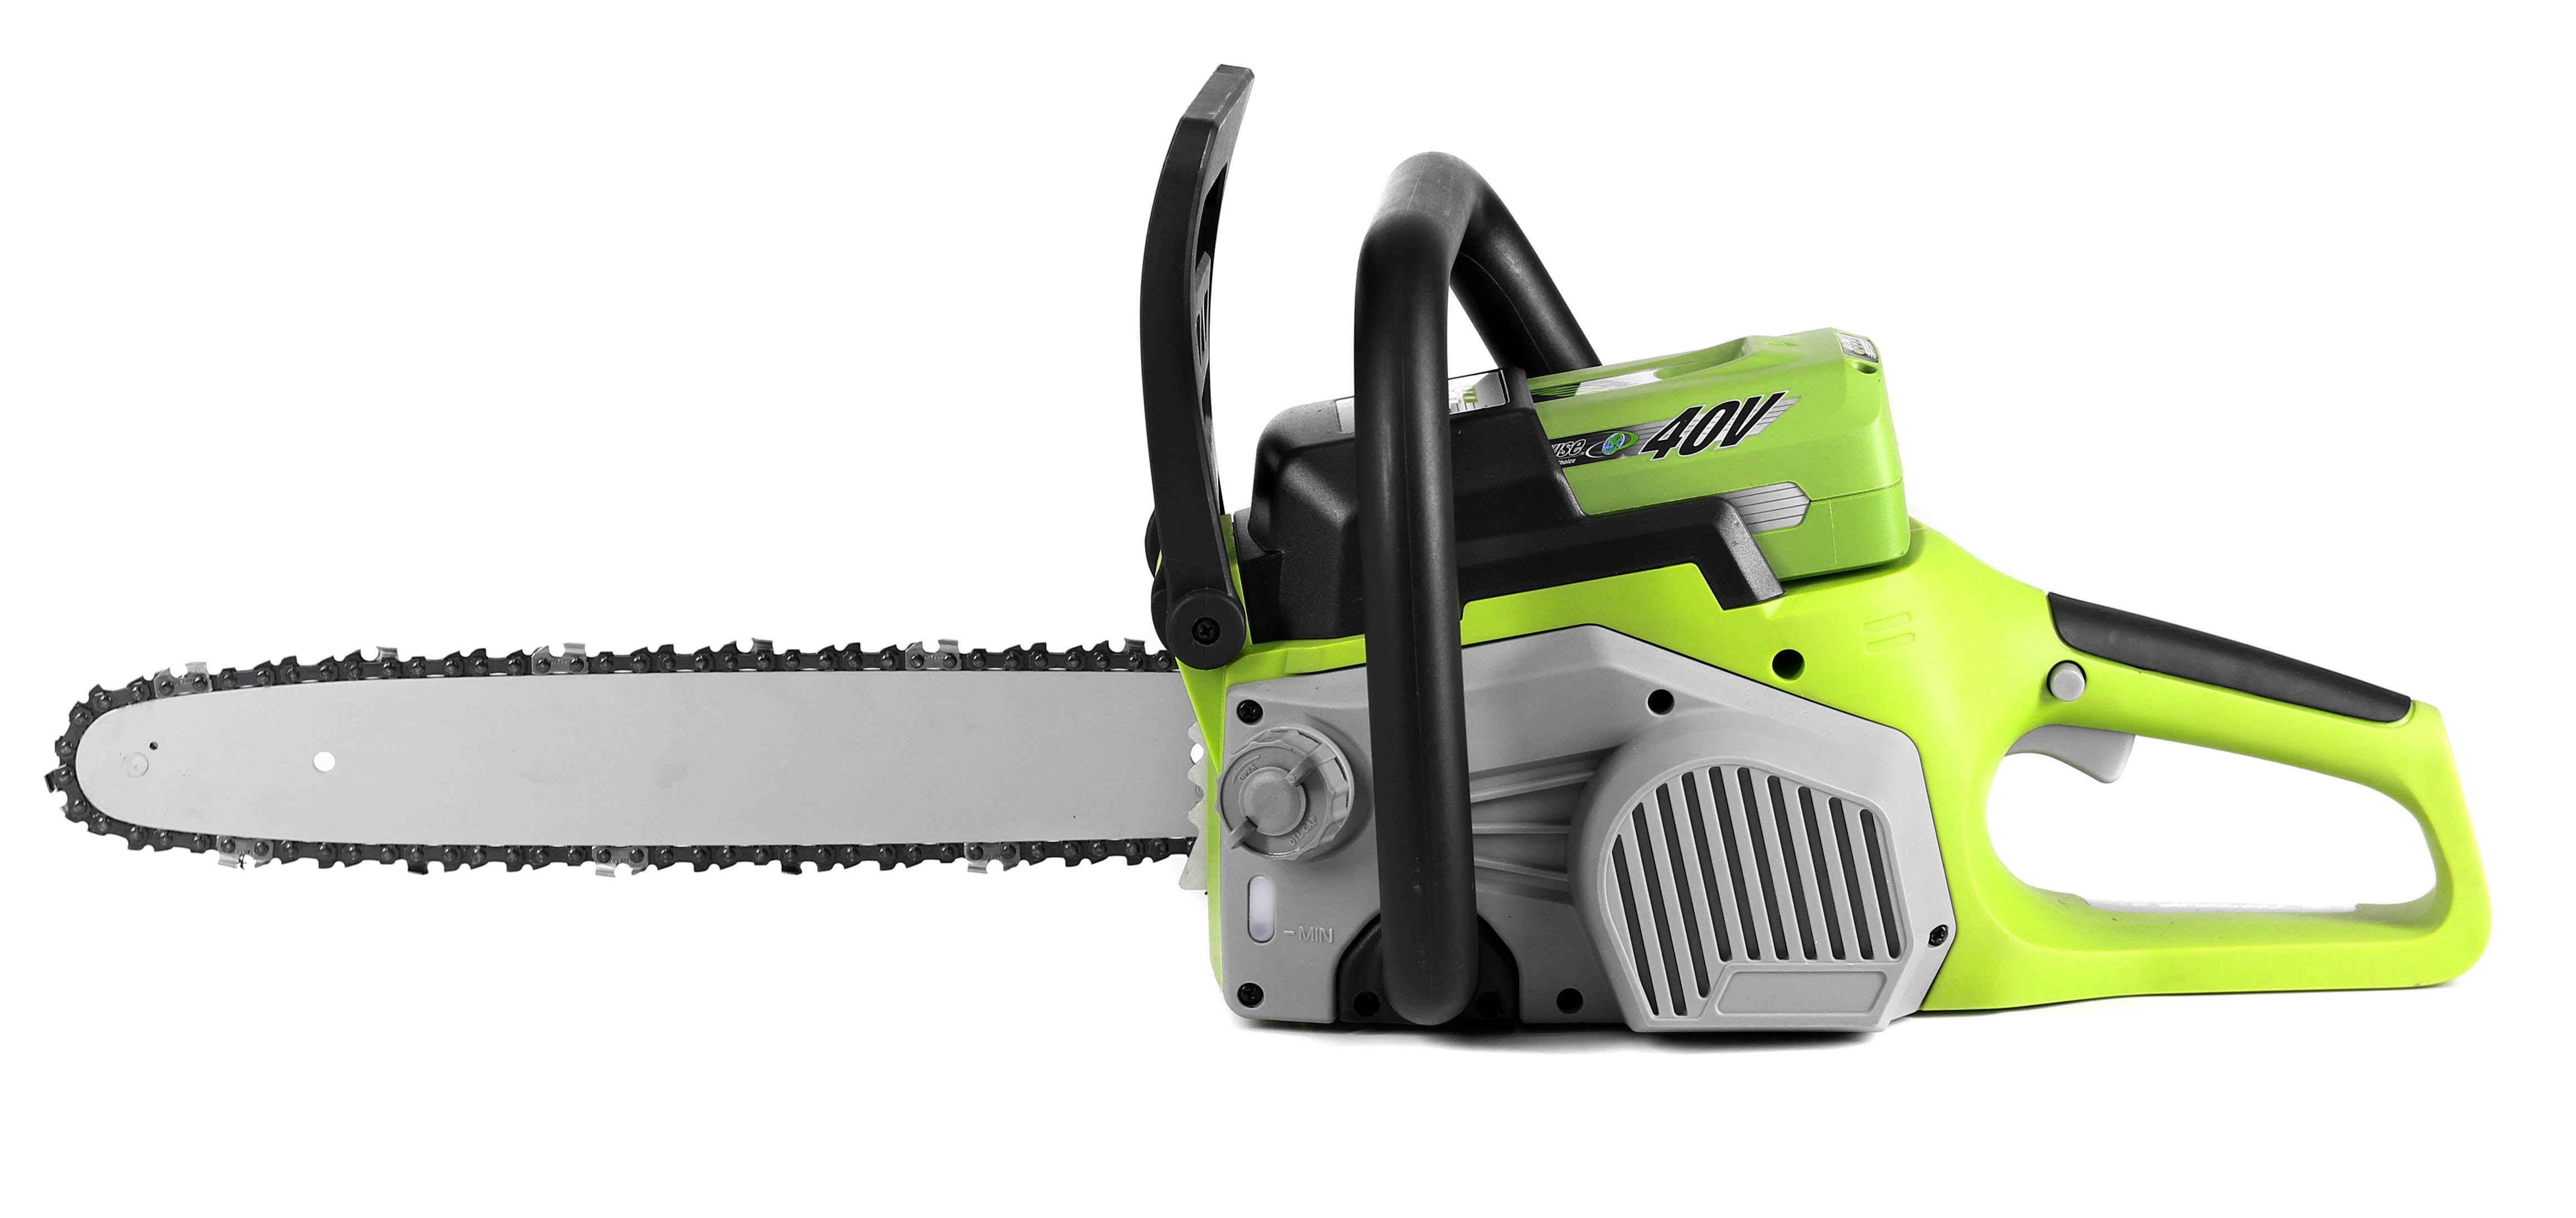 Green Earthwise LCS34014 40V Cordless Electric Chainsaw 2Ah Battery & Charger Included 14